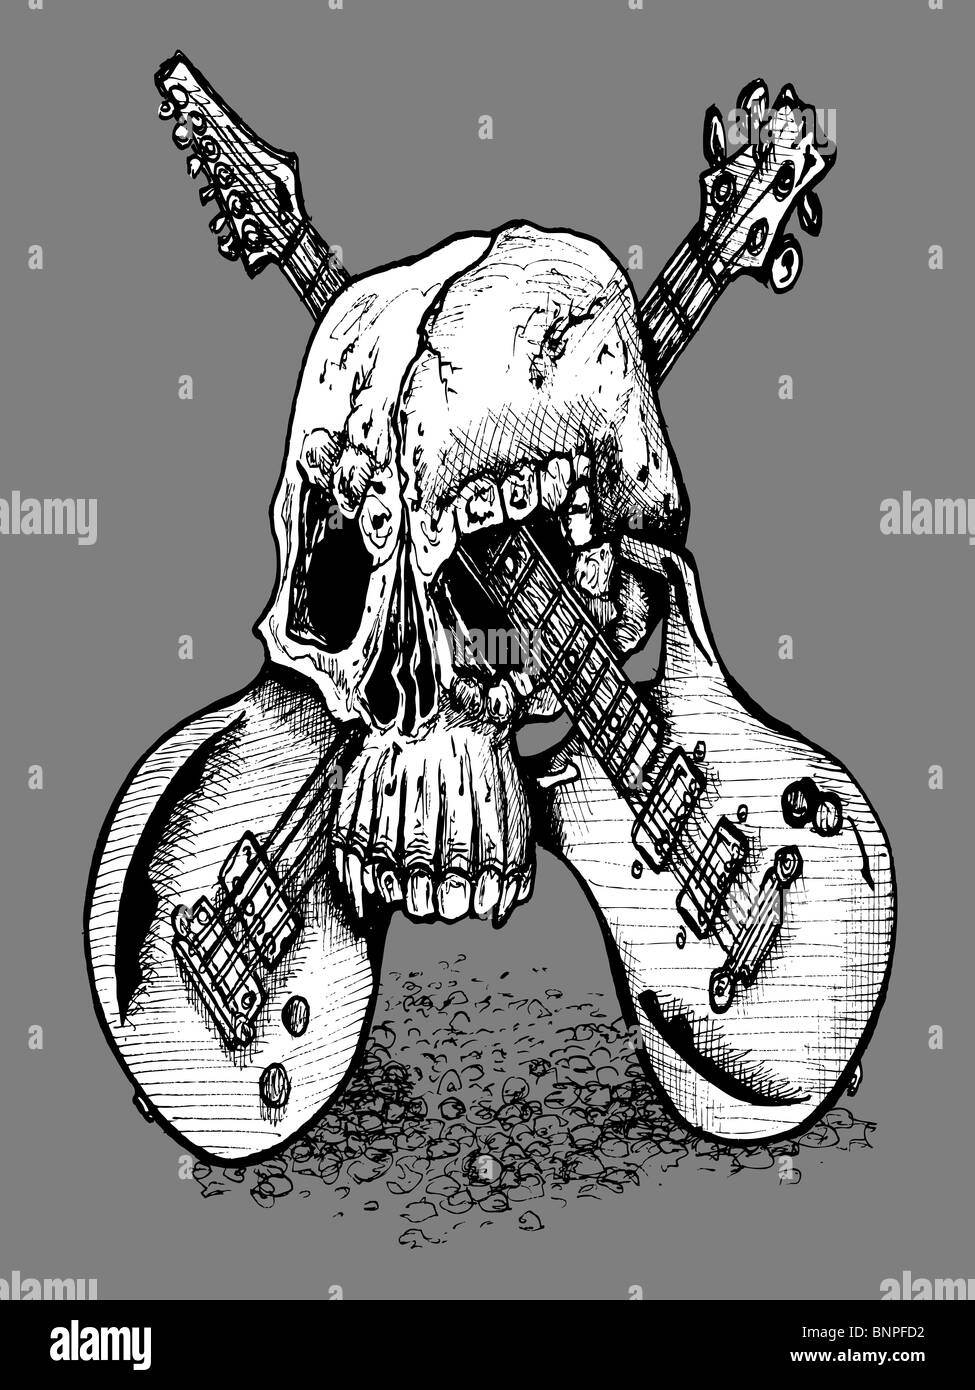 Line drawing of a skull and two crossed guitars on a grey background Stock Photo